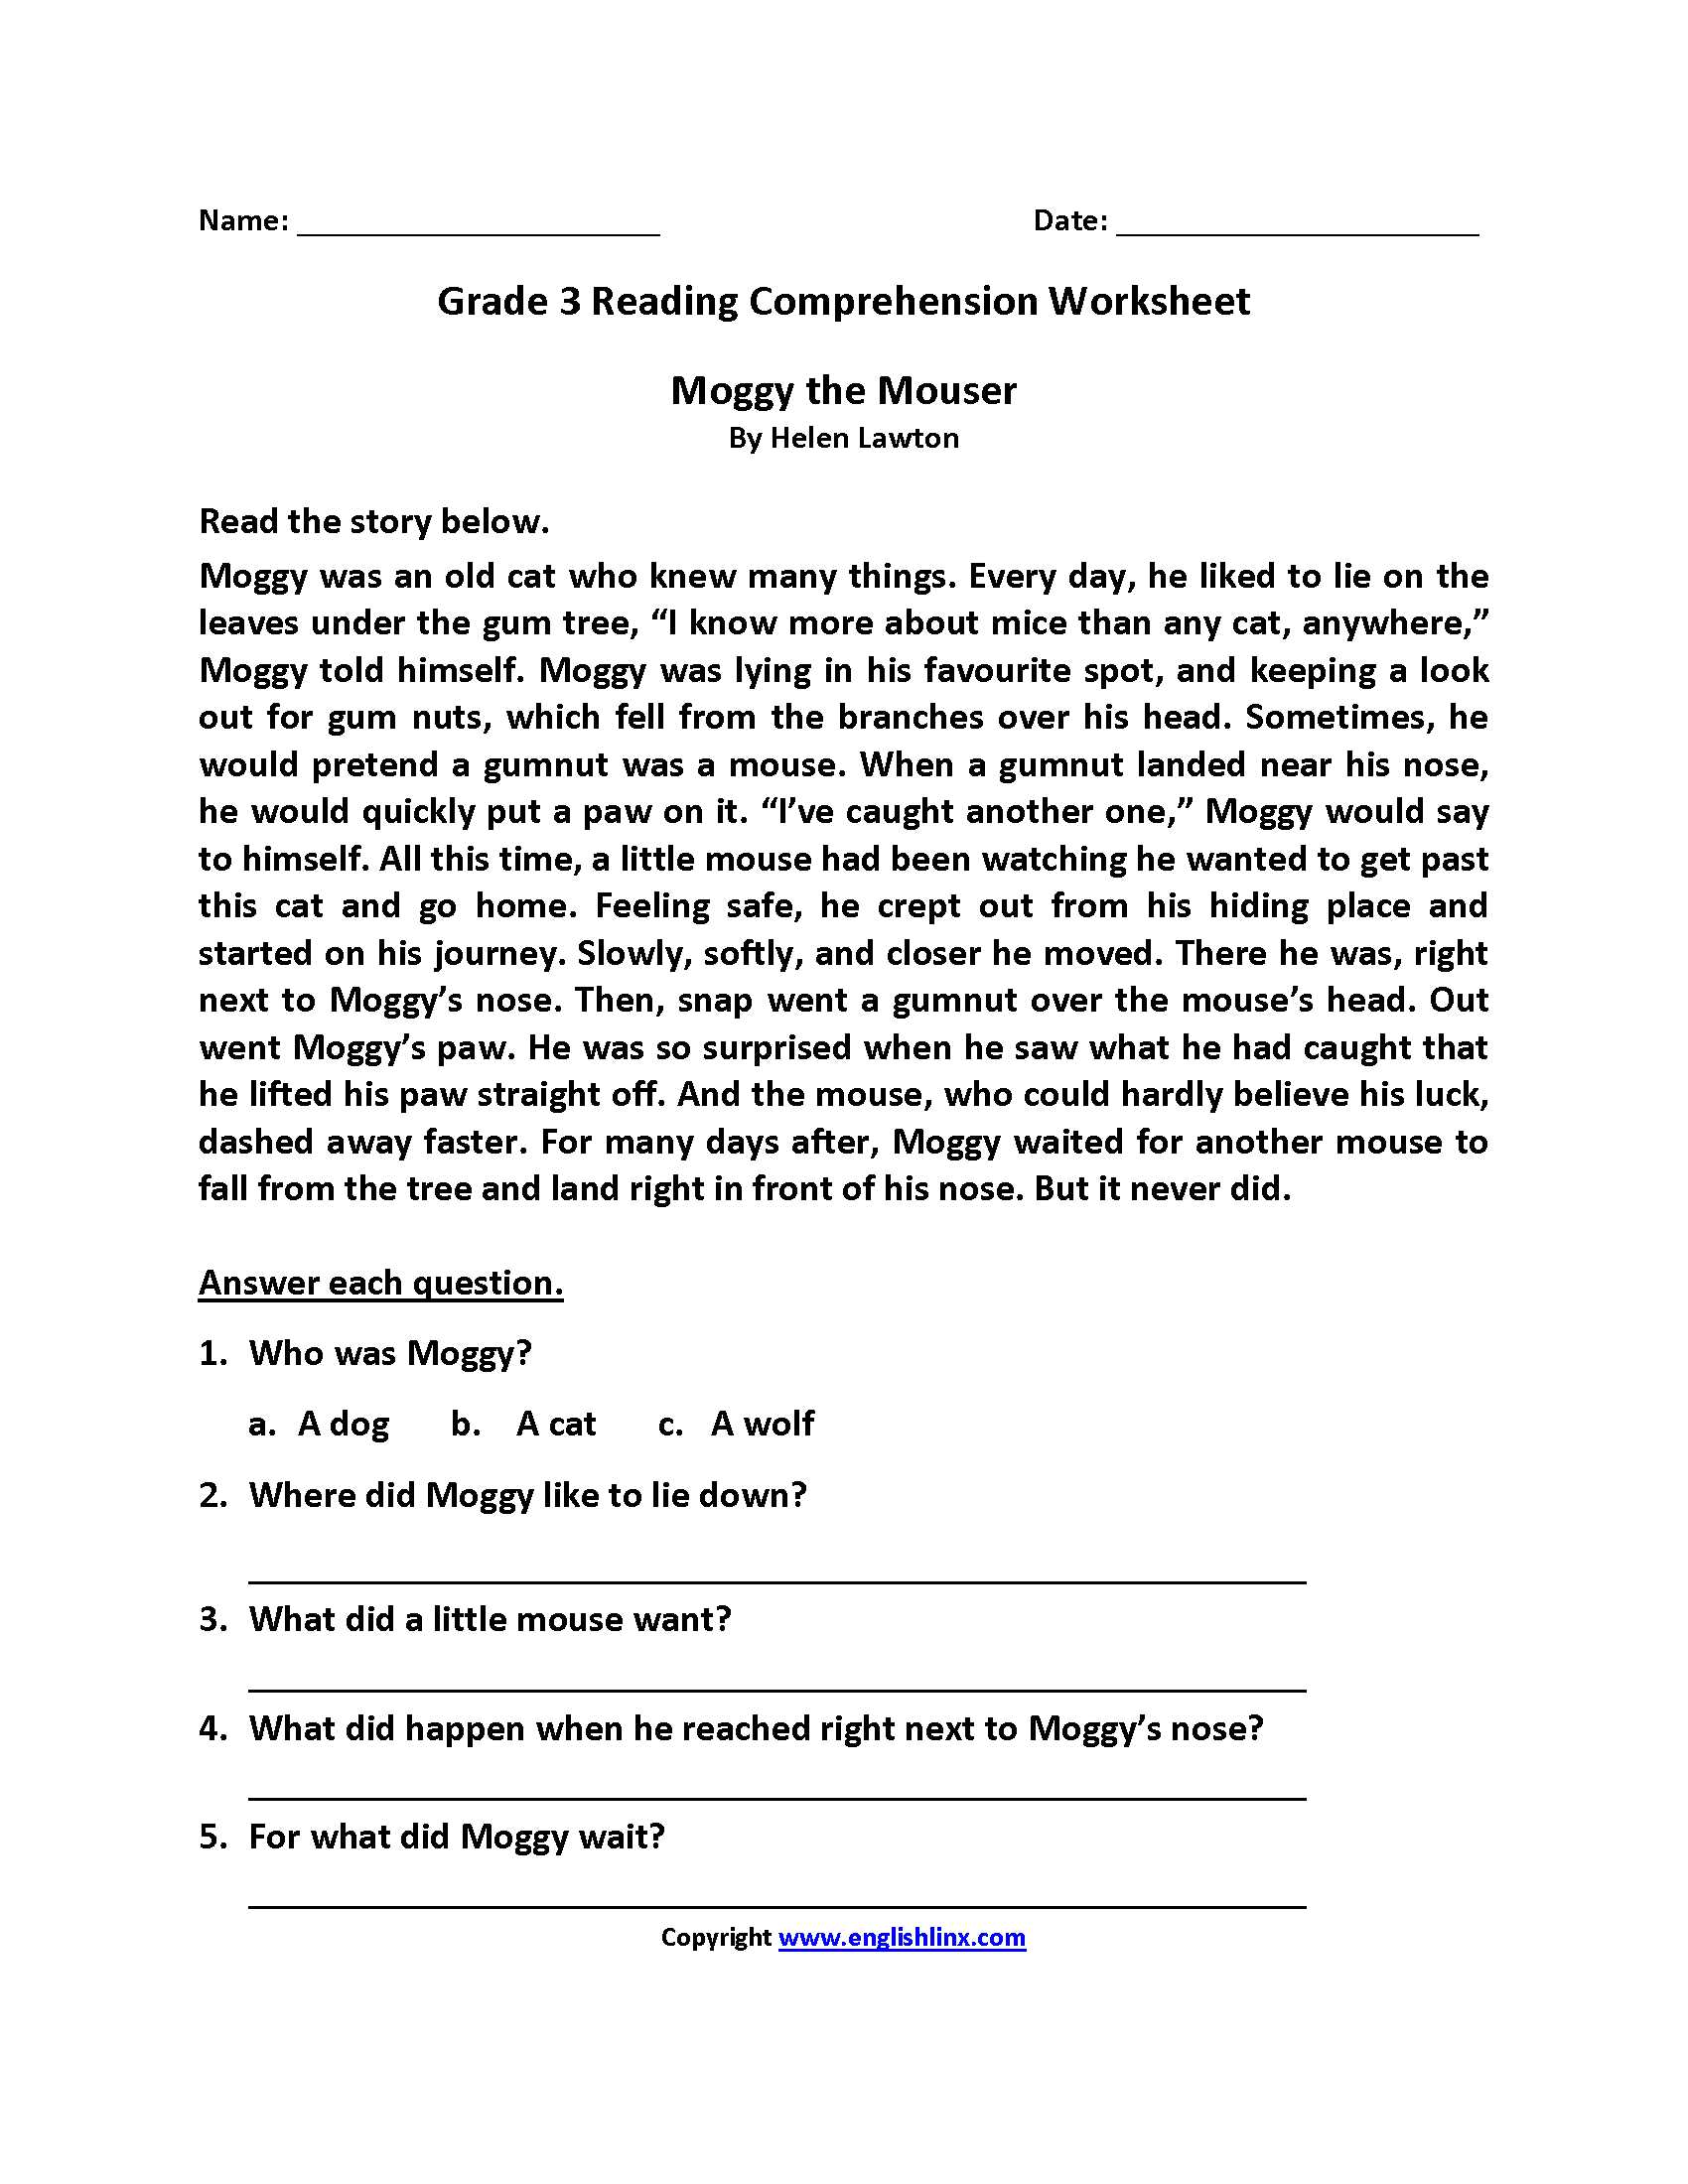 Comprehension Worksheets for Grade 2 as Well as Third Grade Reading Worksheets the Best Worksheets Image Collection